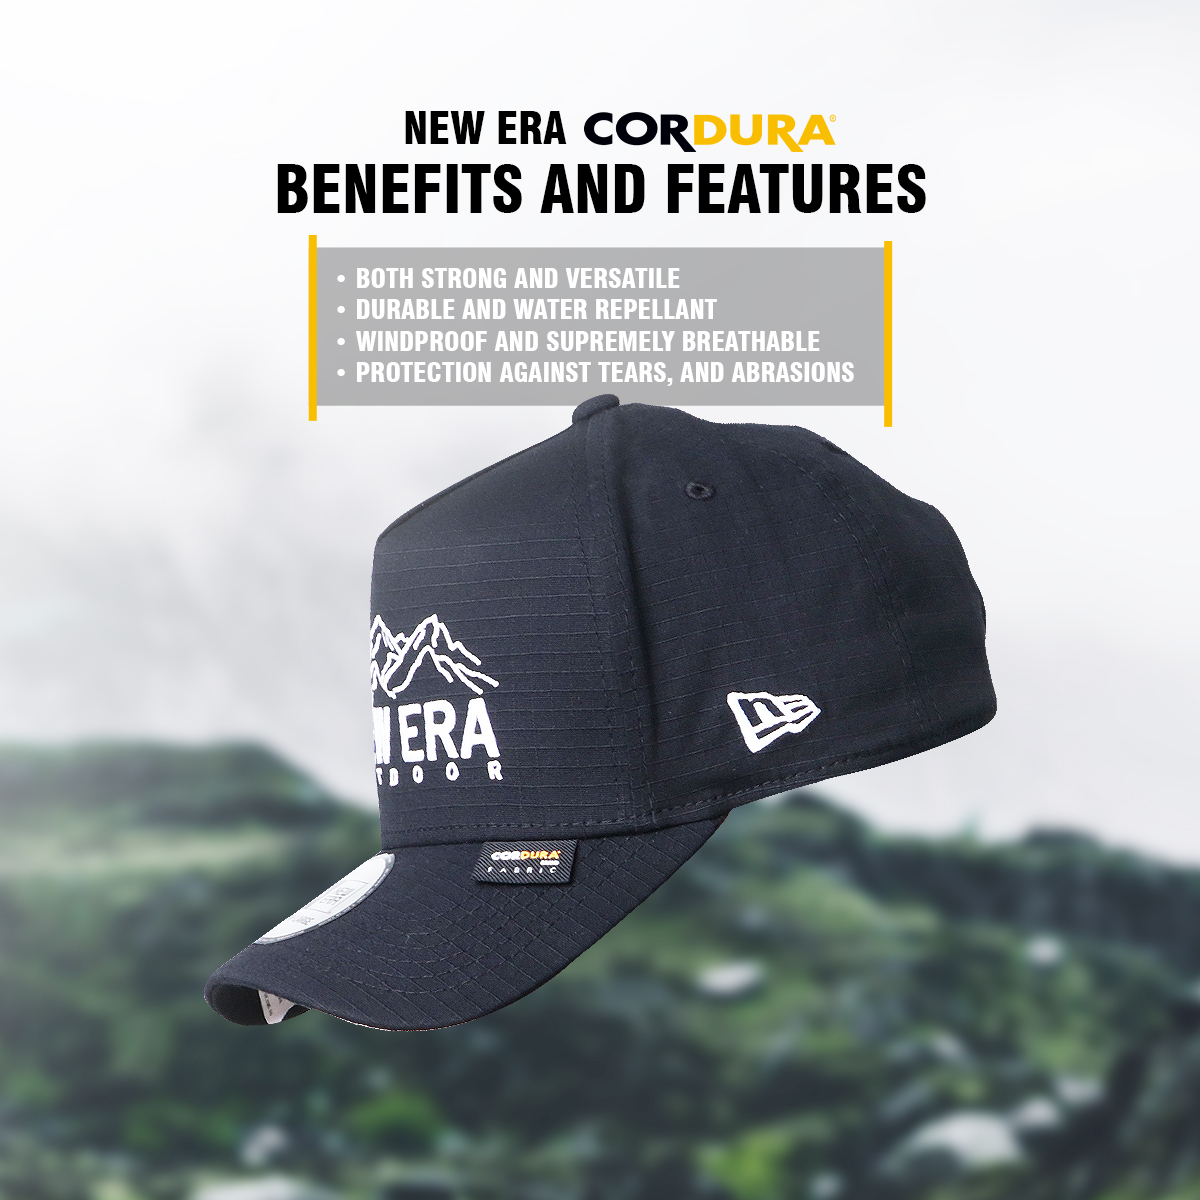 Conquer Greater Heights with New Era CORDURA® | What's New | New 